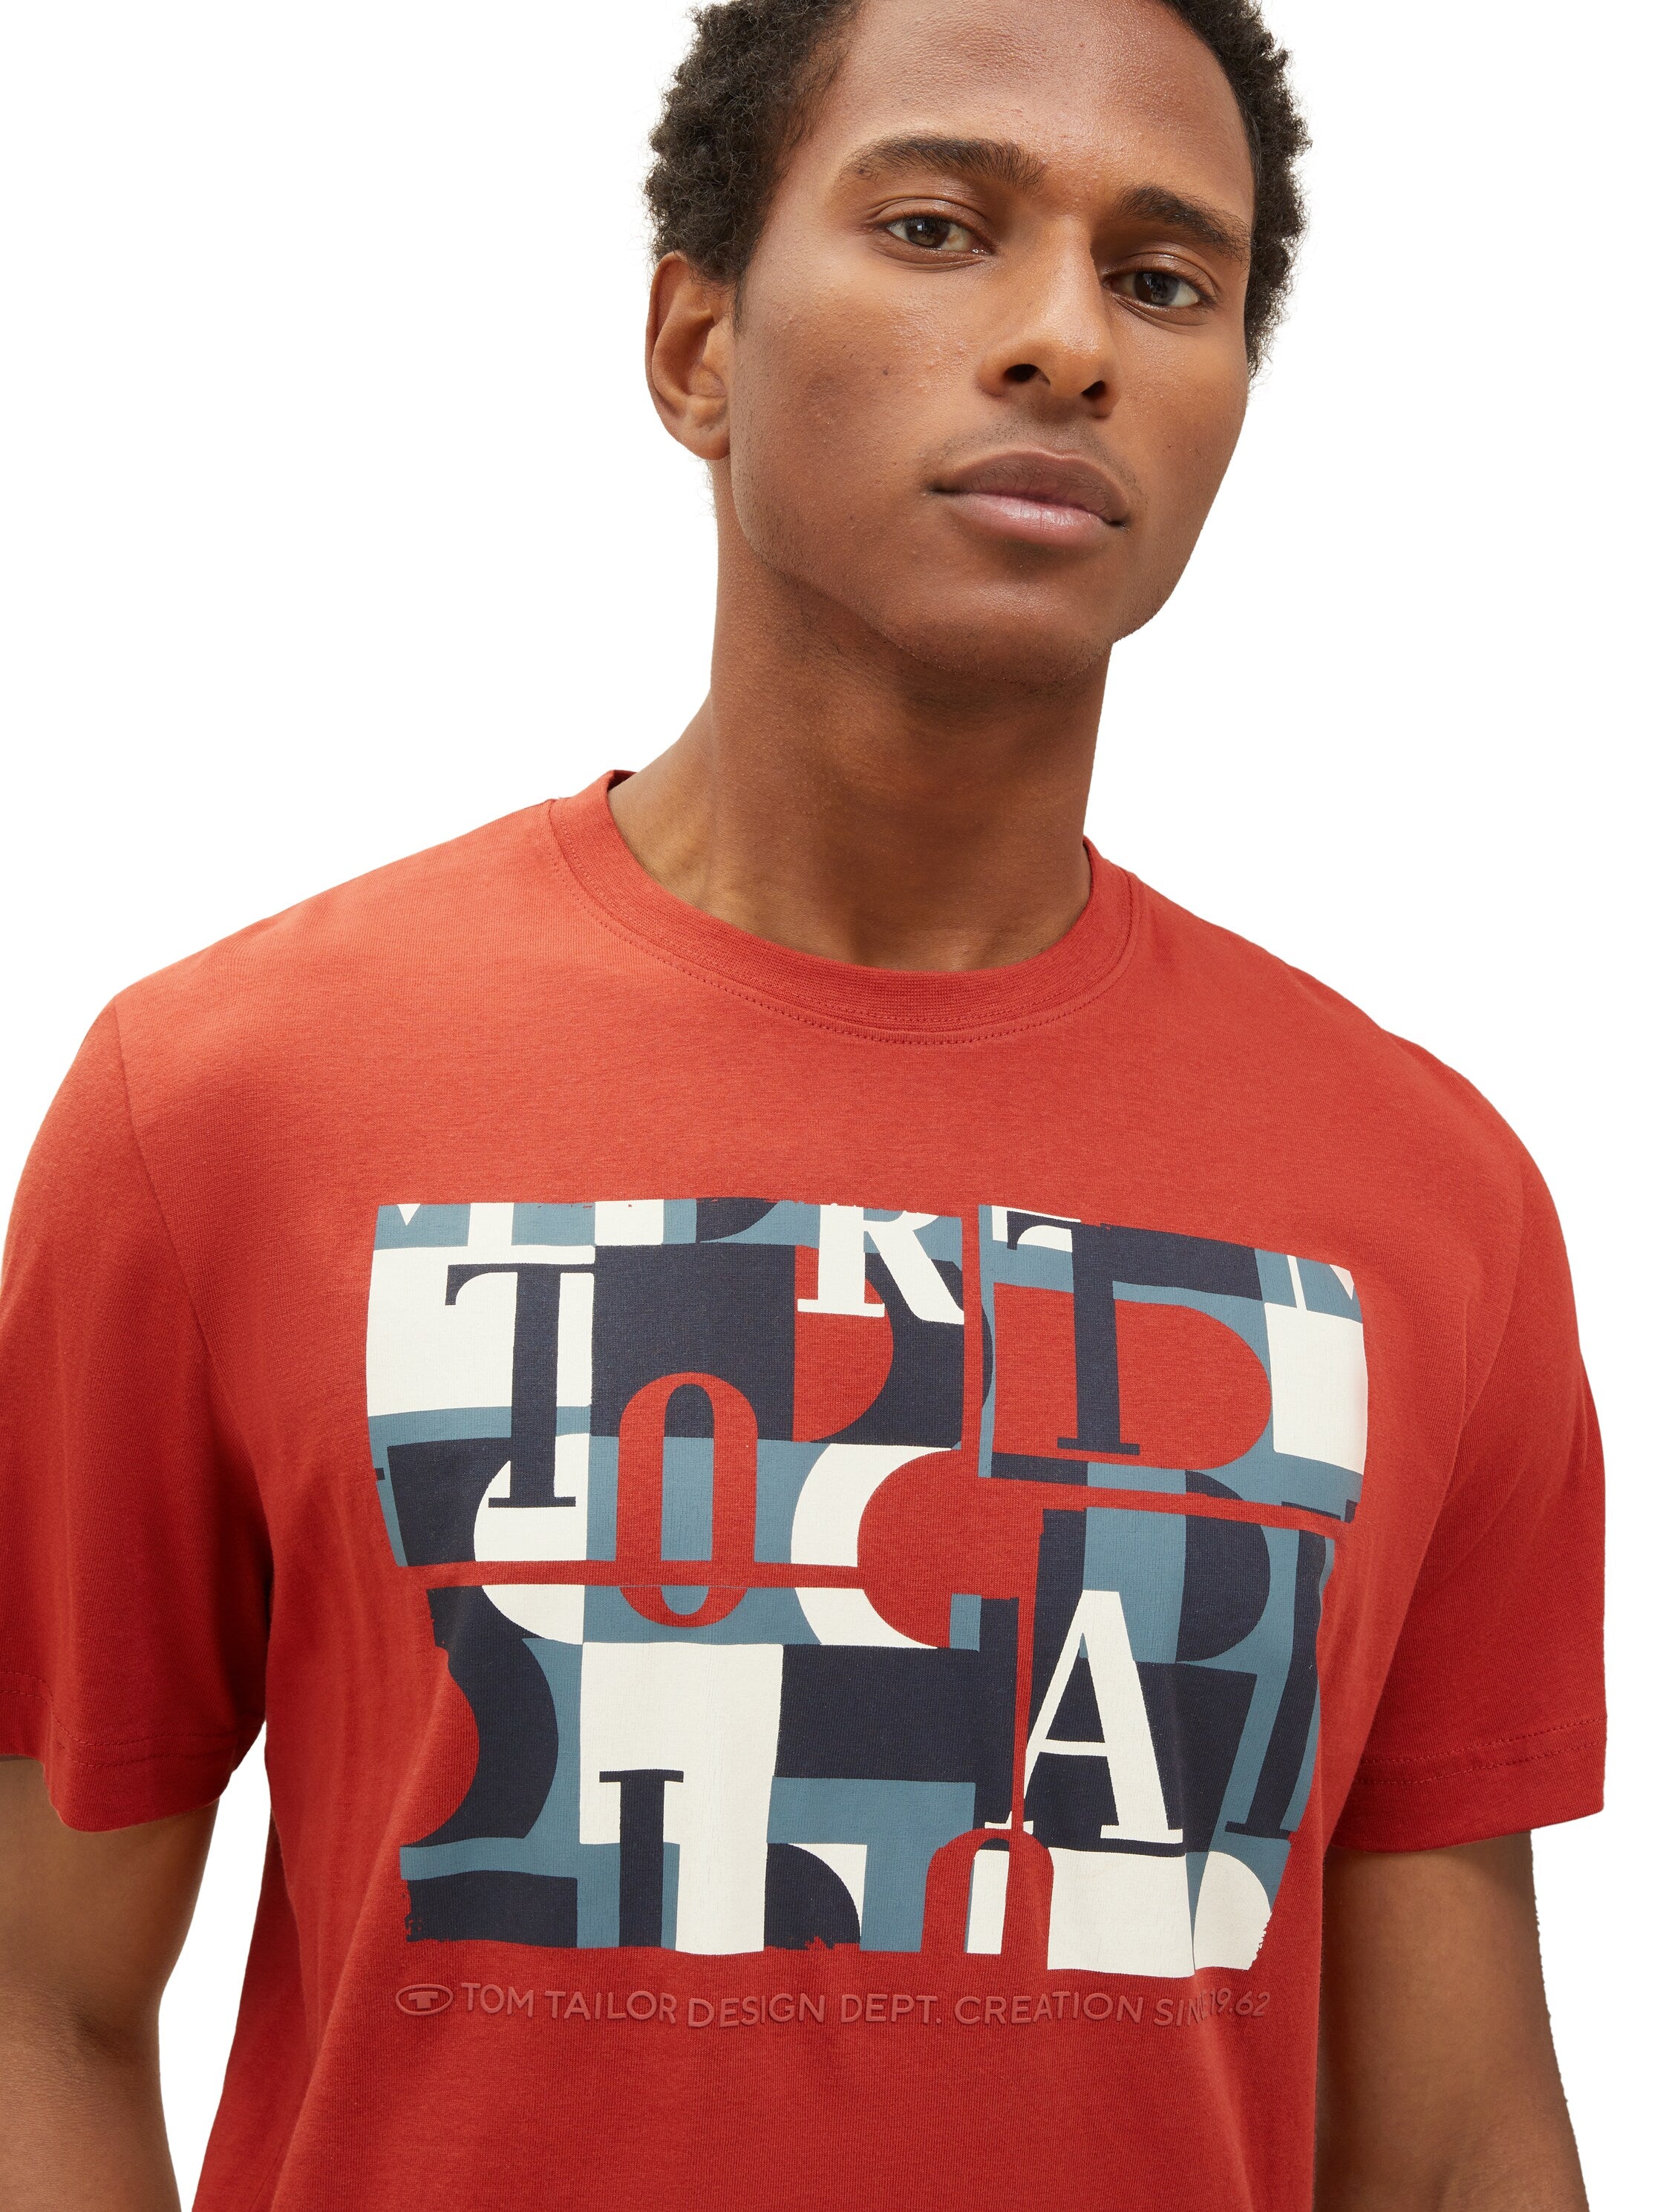 Tom Tailor Orange T-Shirt with a Print